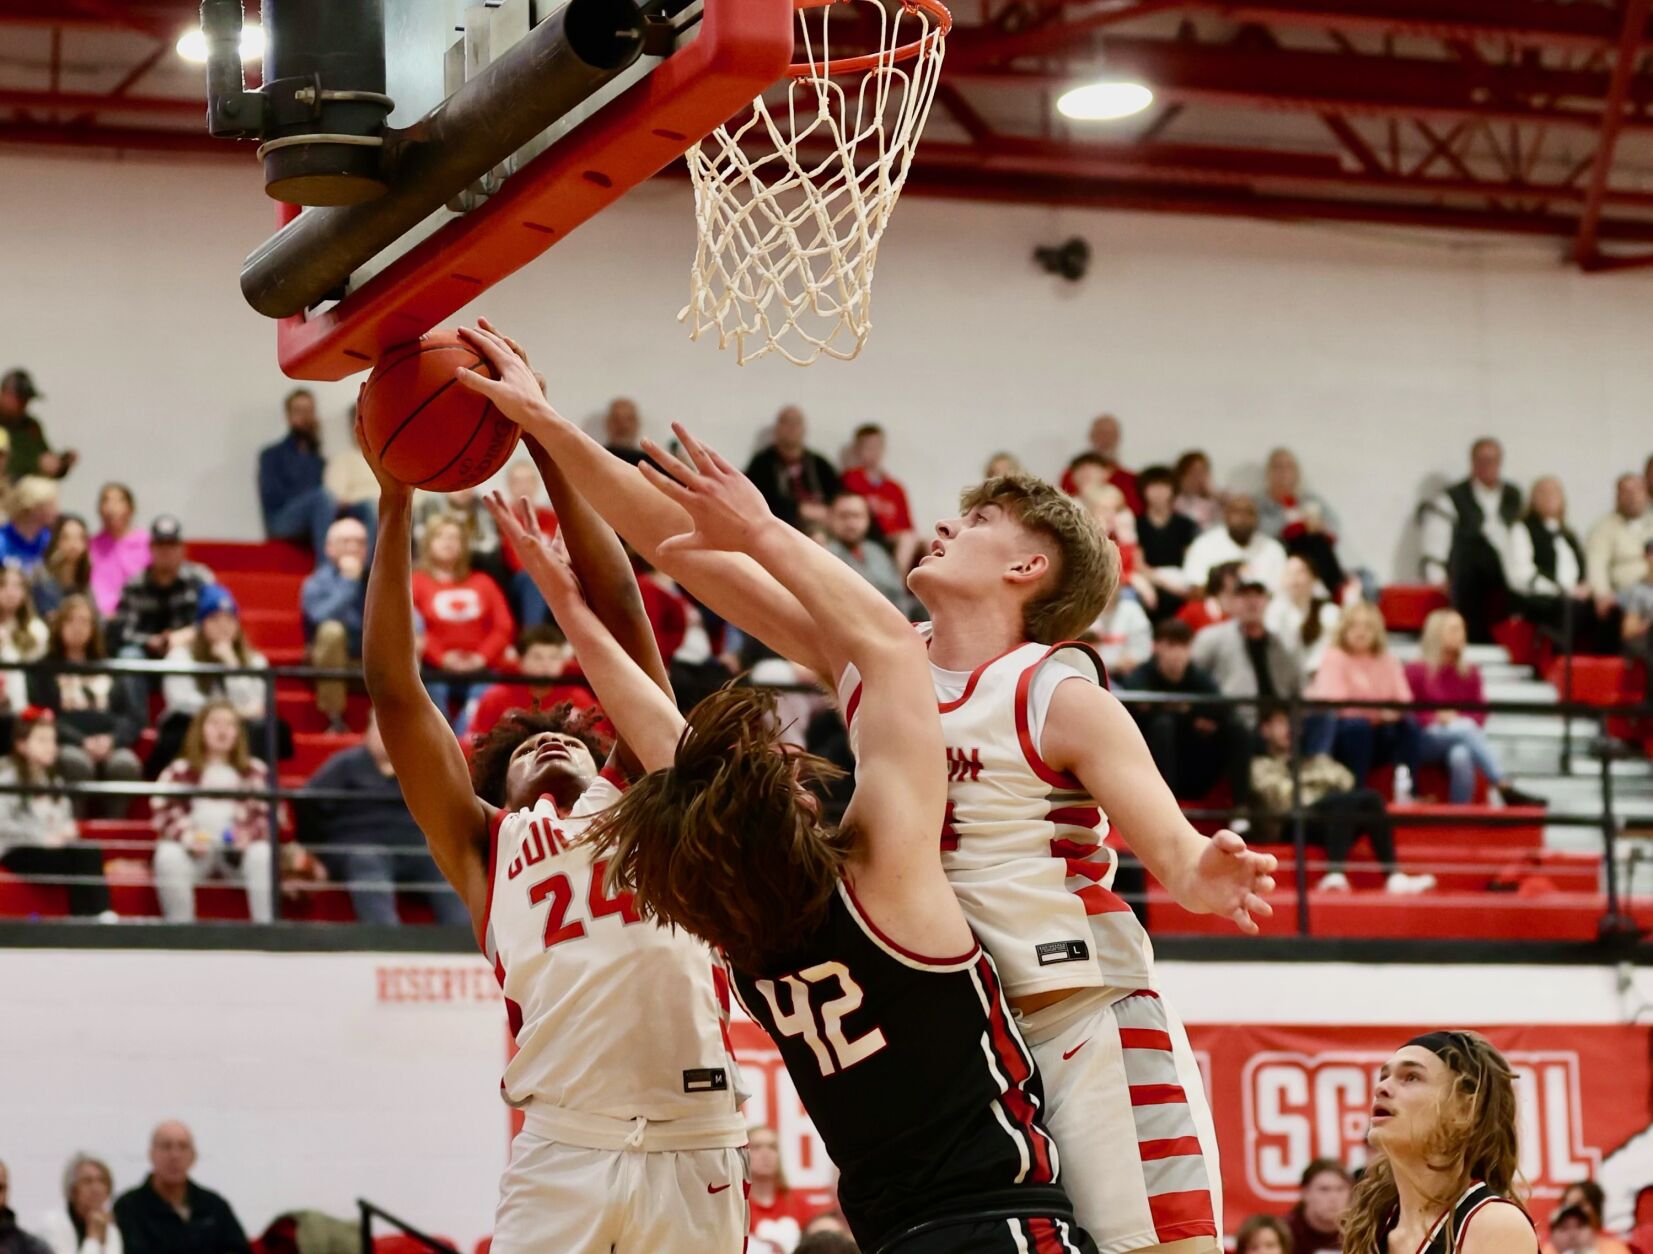 Harlan County holds off Corbin with 59-53 win